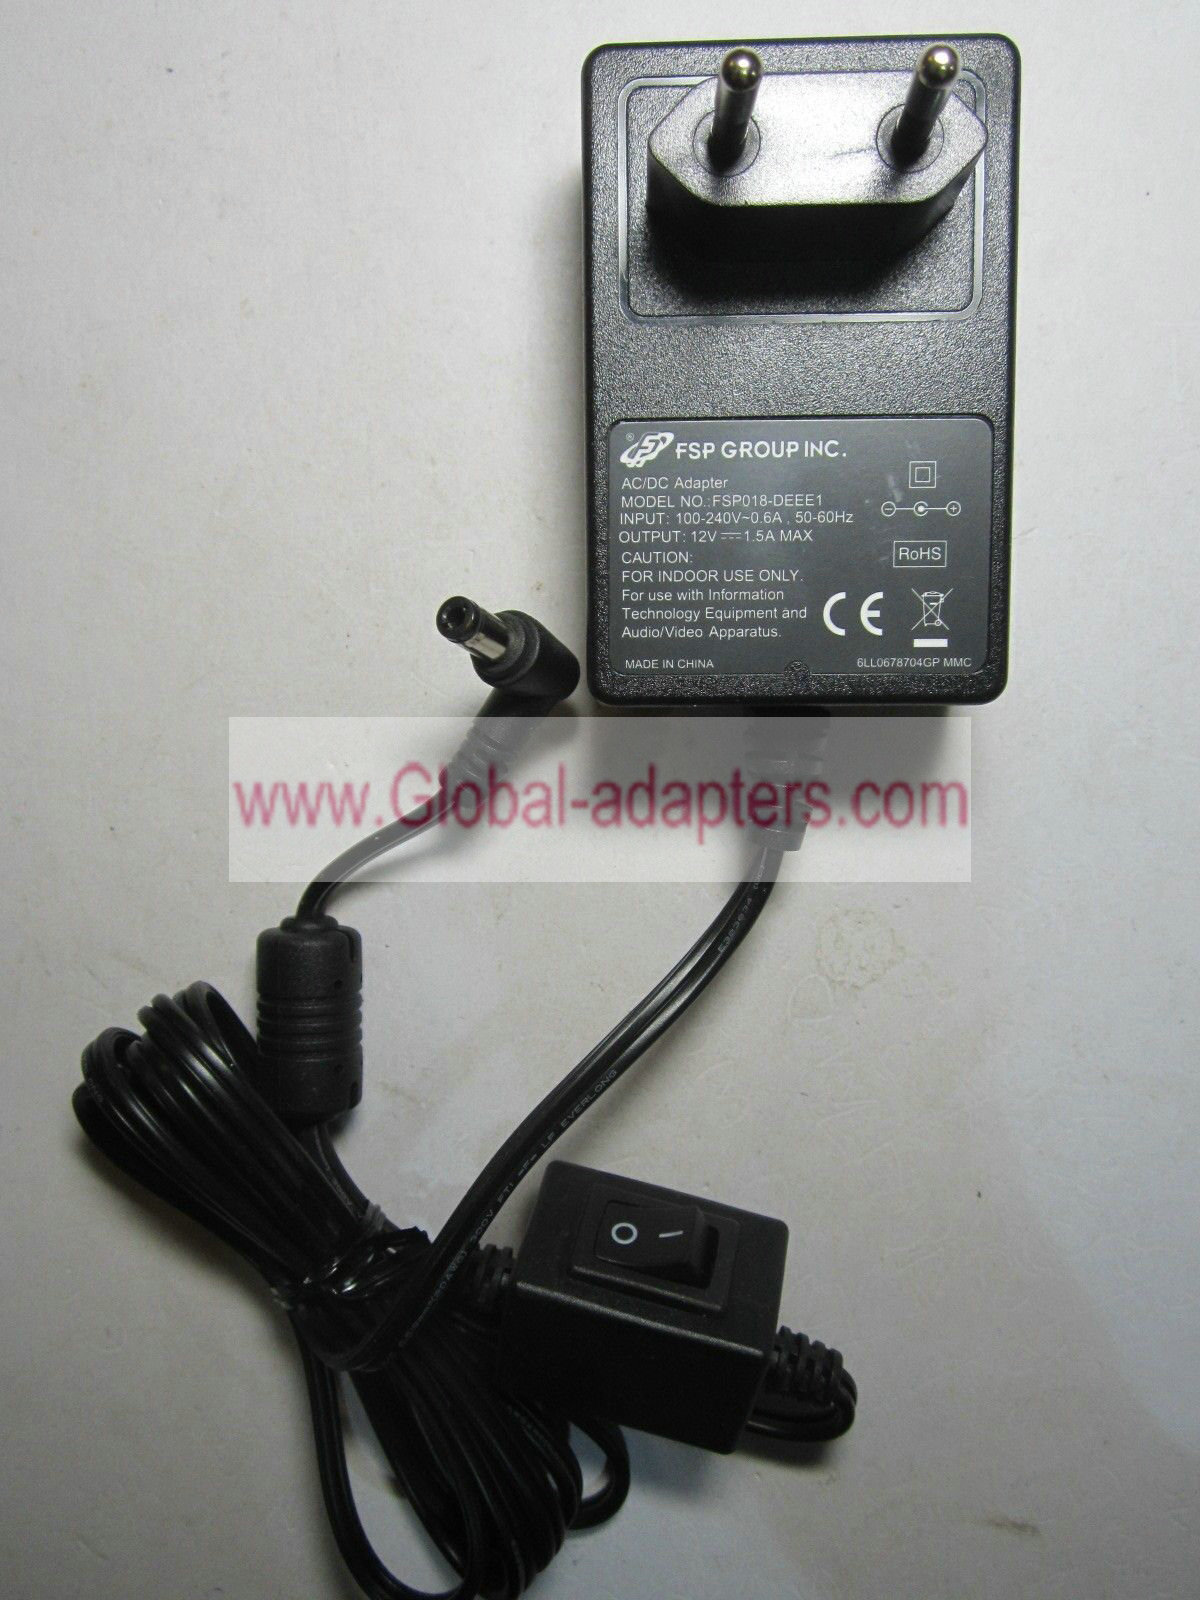 NEW FSP GROUP INC 12V 1.5A FSP018-DEEE1 AC/DC Adapter Power Supply 5.5mm x 2.1mm - Click Image to Close